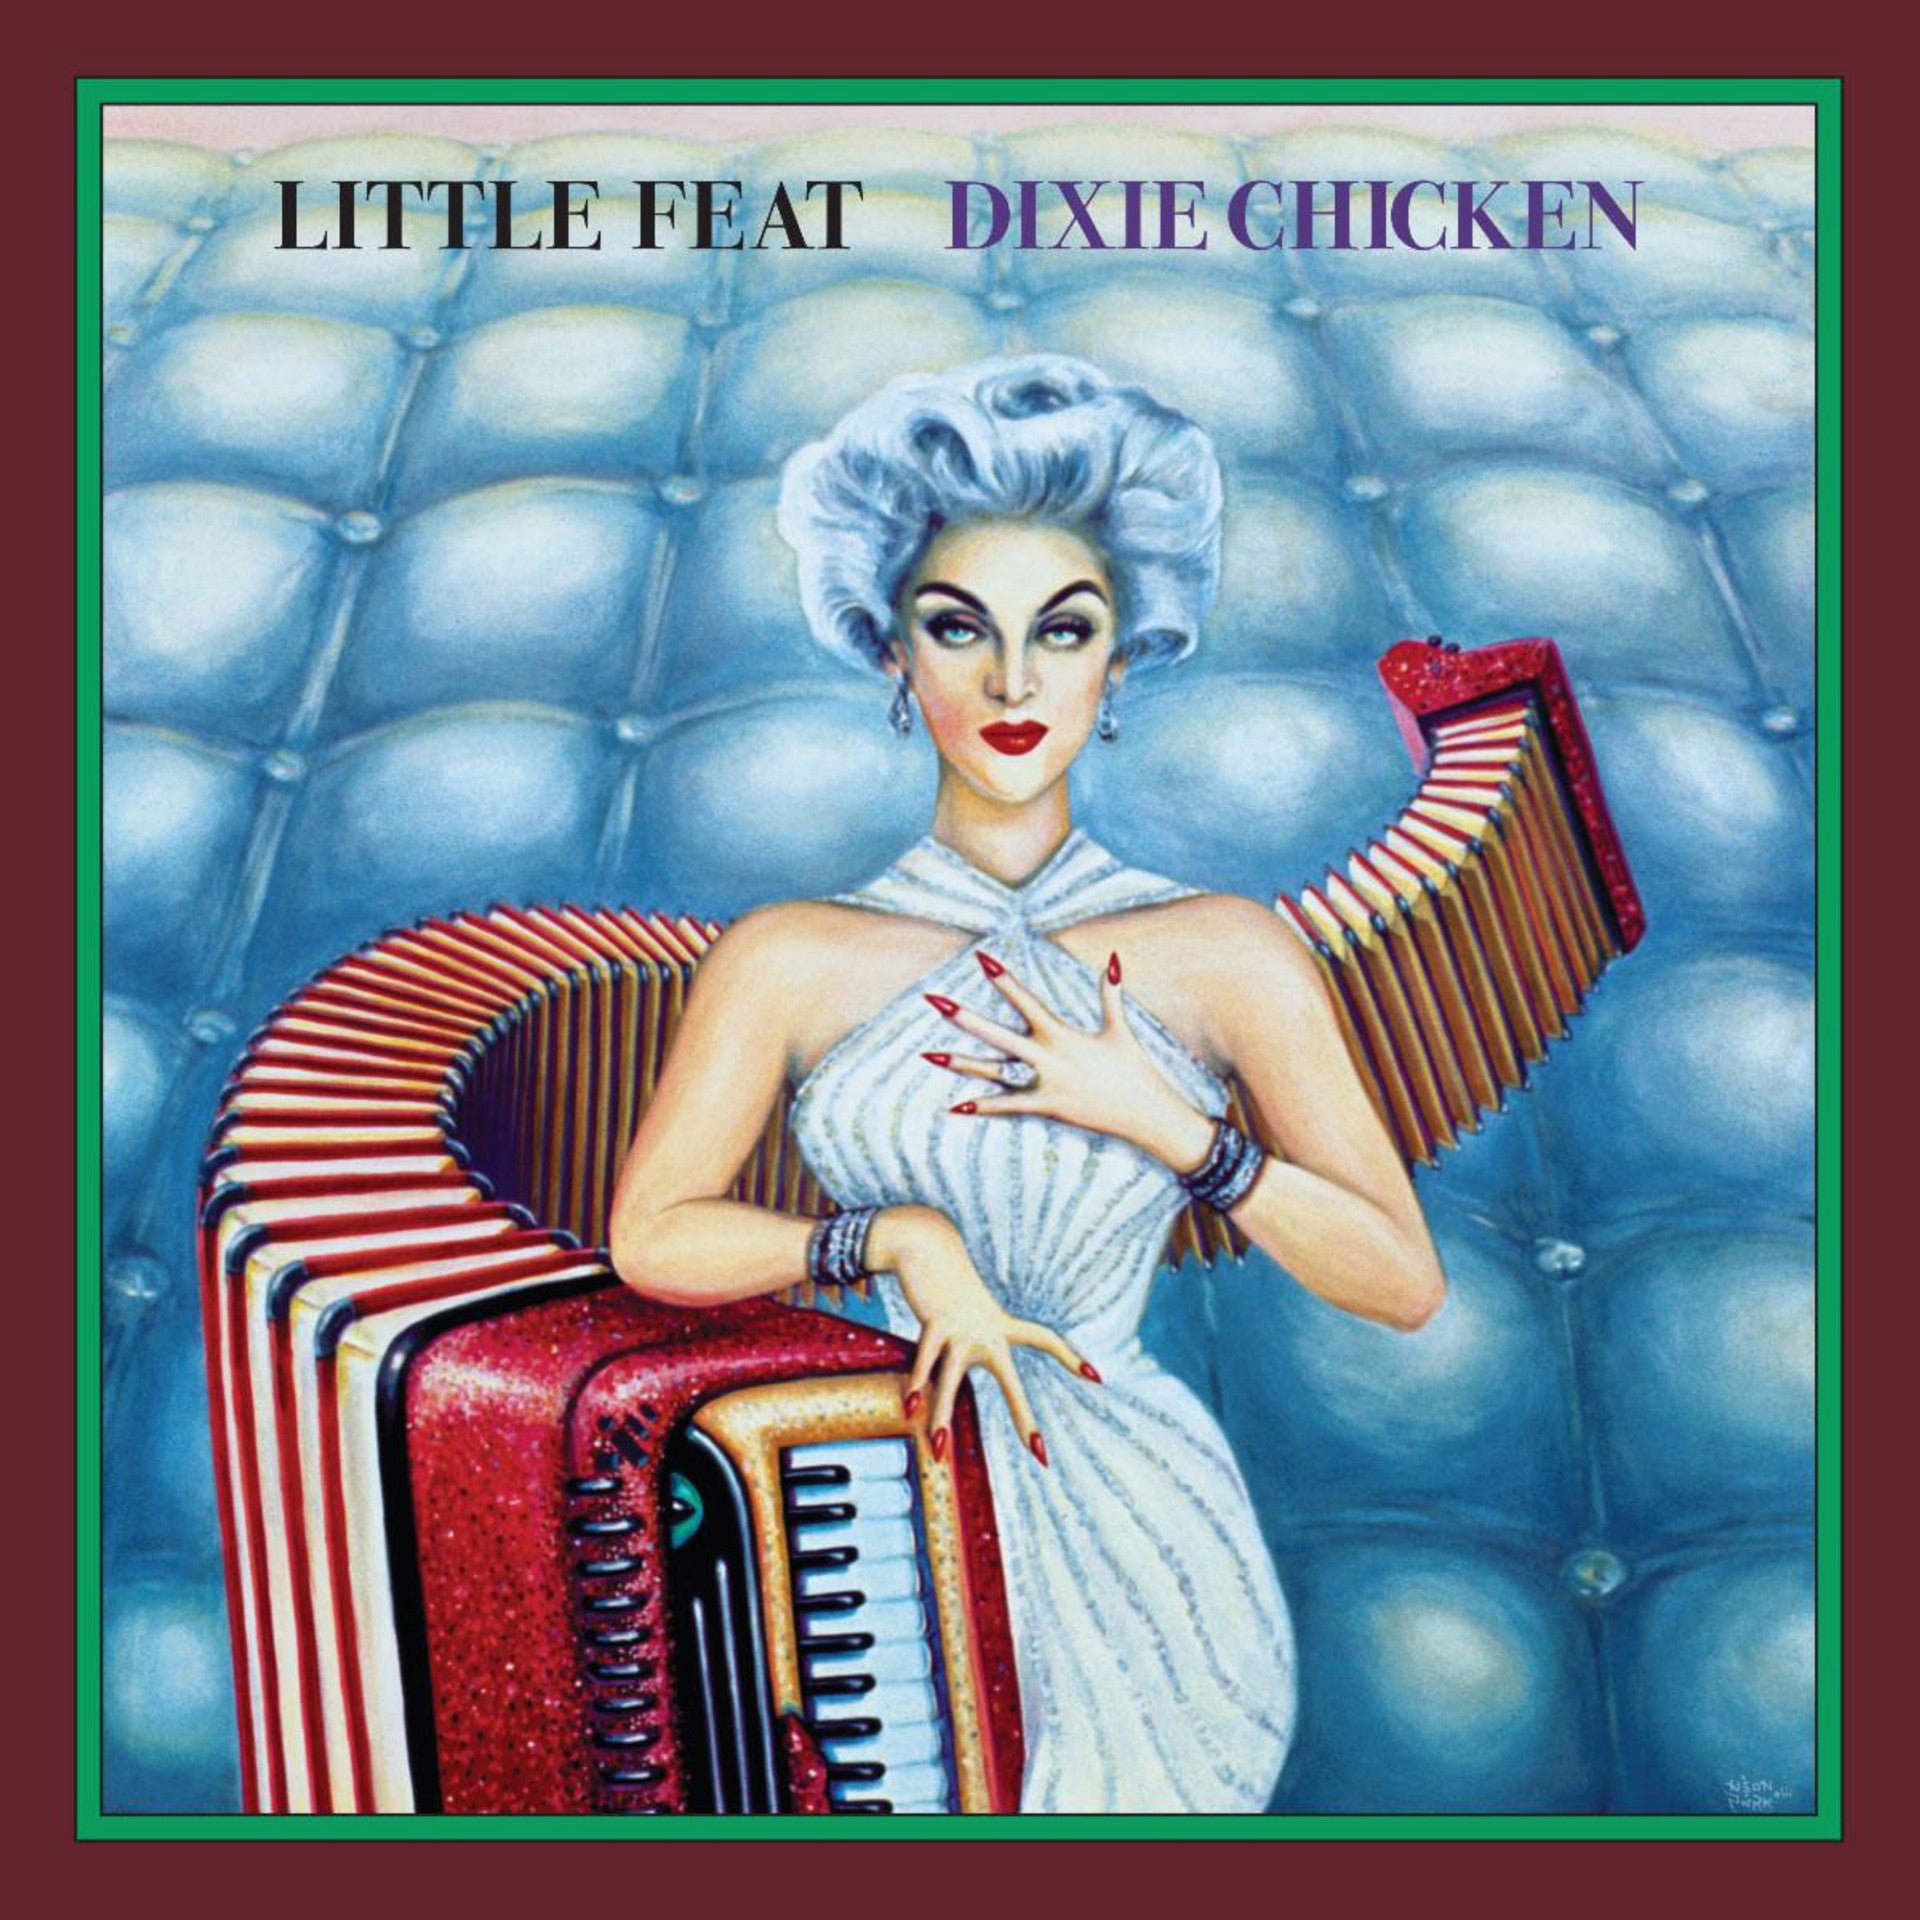 Little Feat "Dixie Chicken" [Deluxe Edition] 3LP